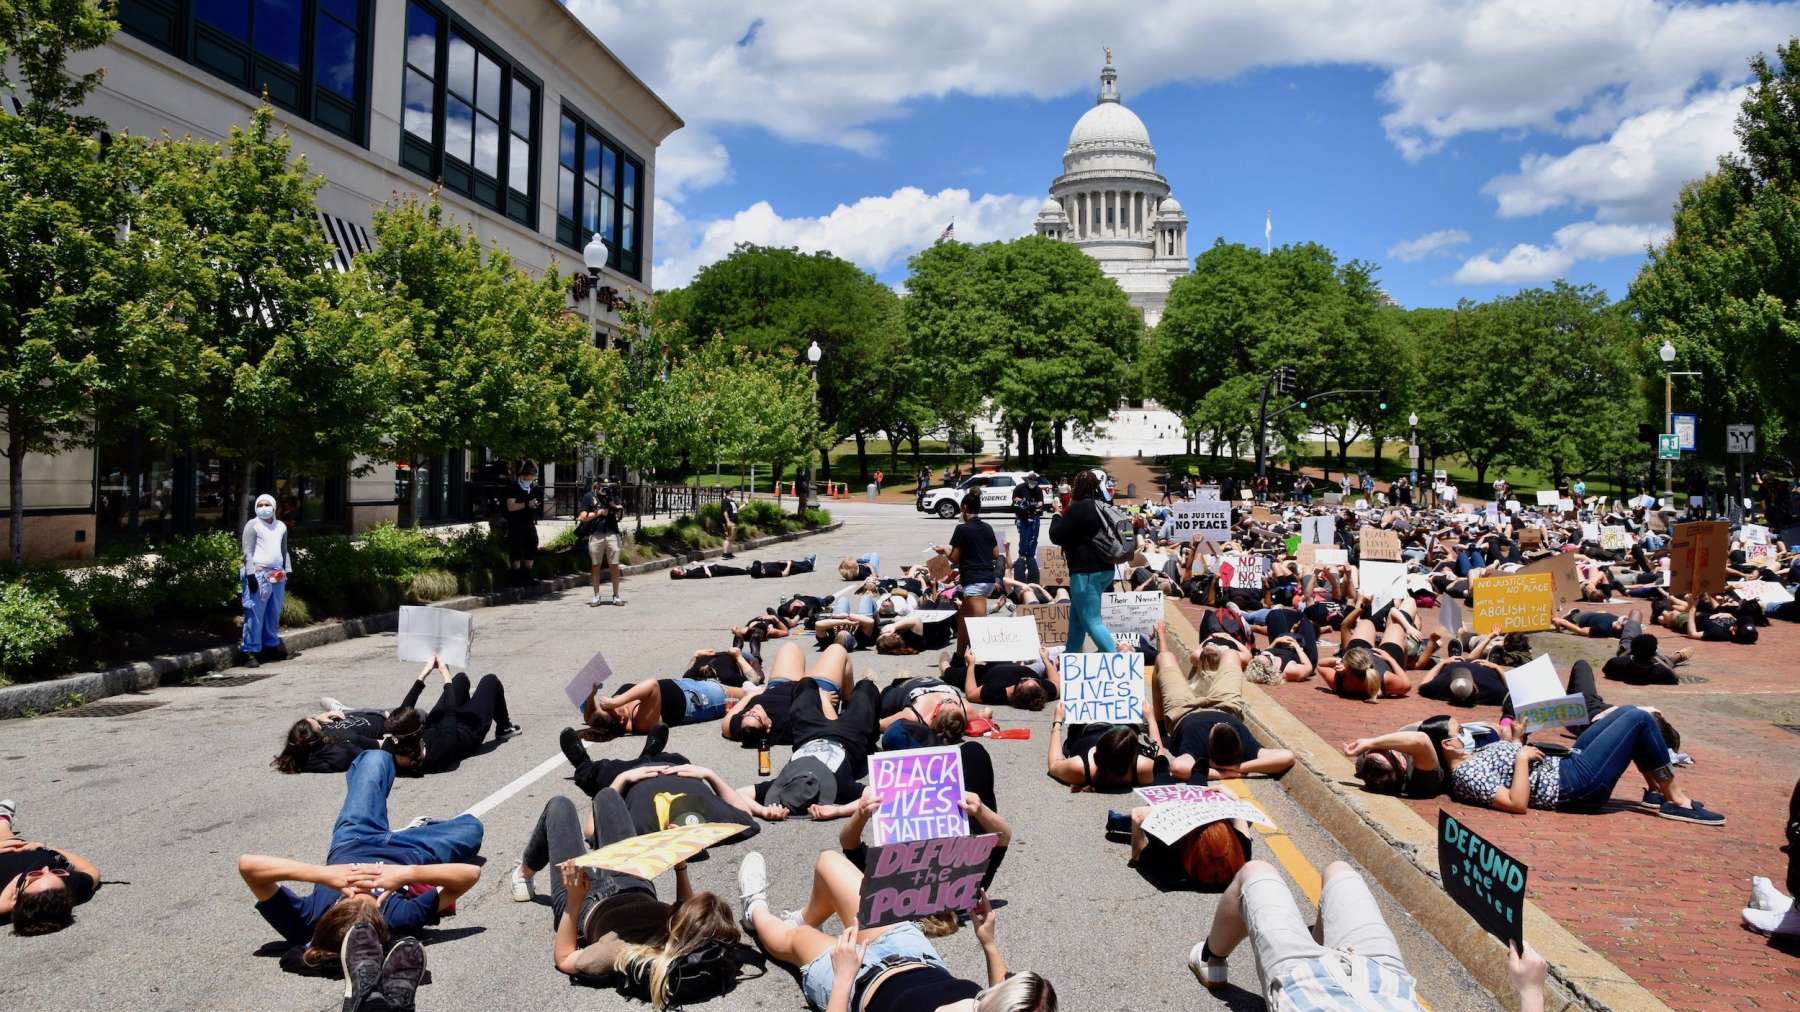 Rhode Island News: Youth protest in support of Black lives stages die-in outside State House